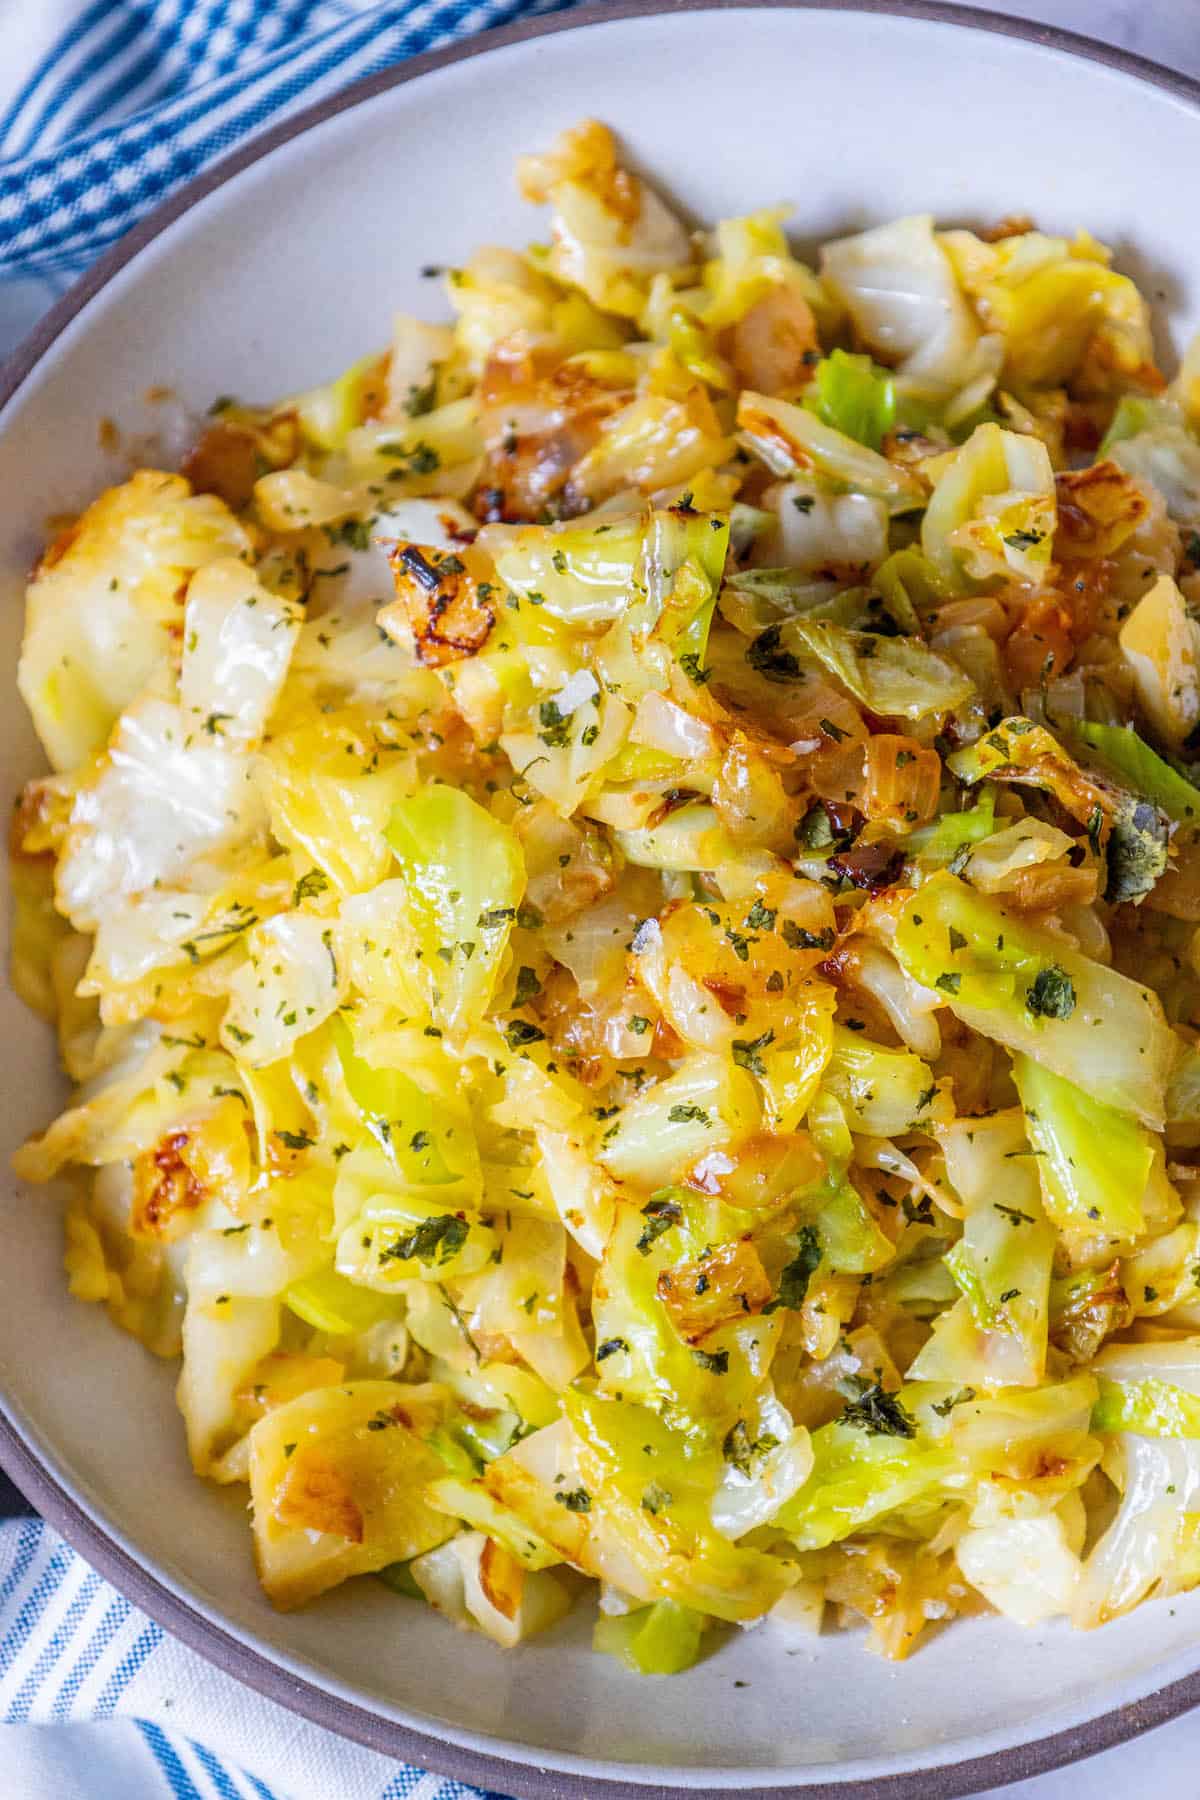 A bowl of fried keto cabbage on a blue and white cloth.